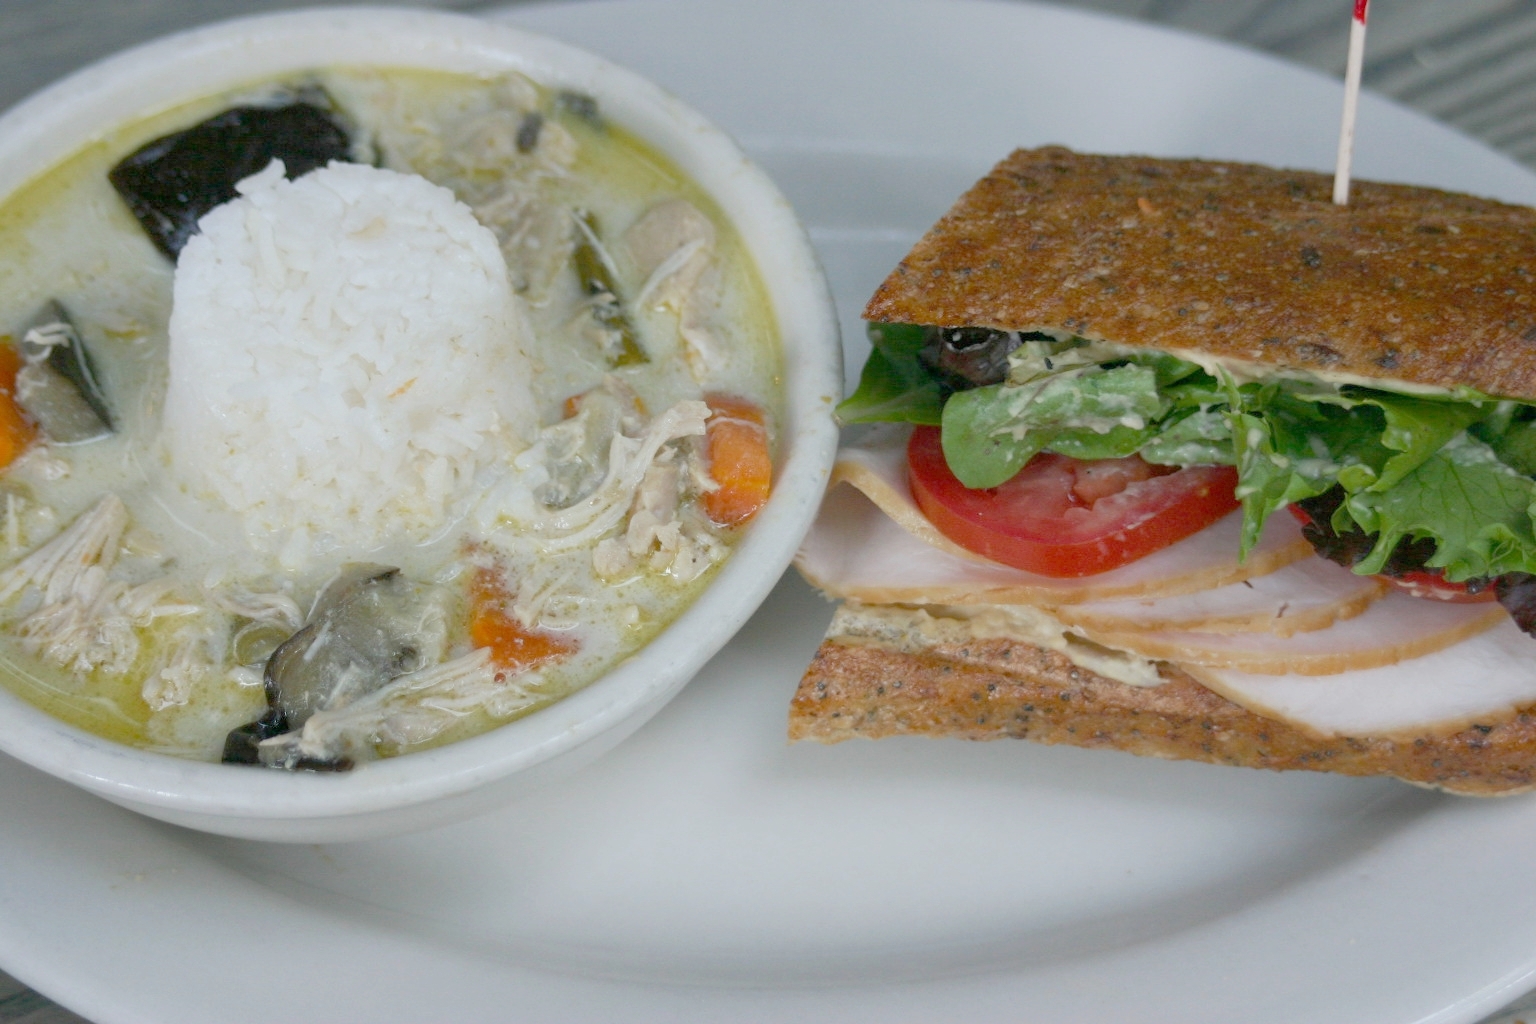 Green Thai Coconut Curry with Chicken & Middle Eastern Turkey Sandwich